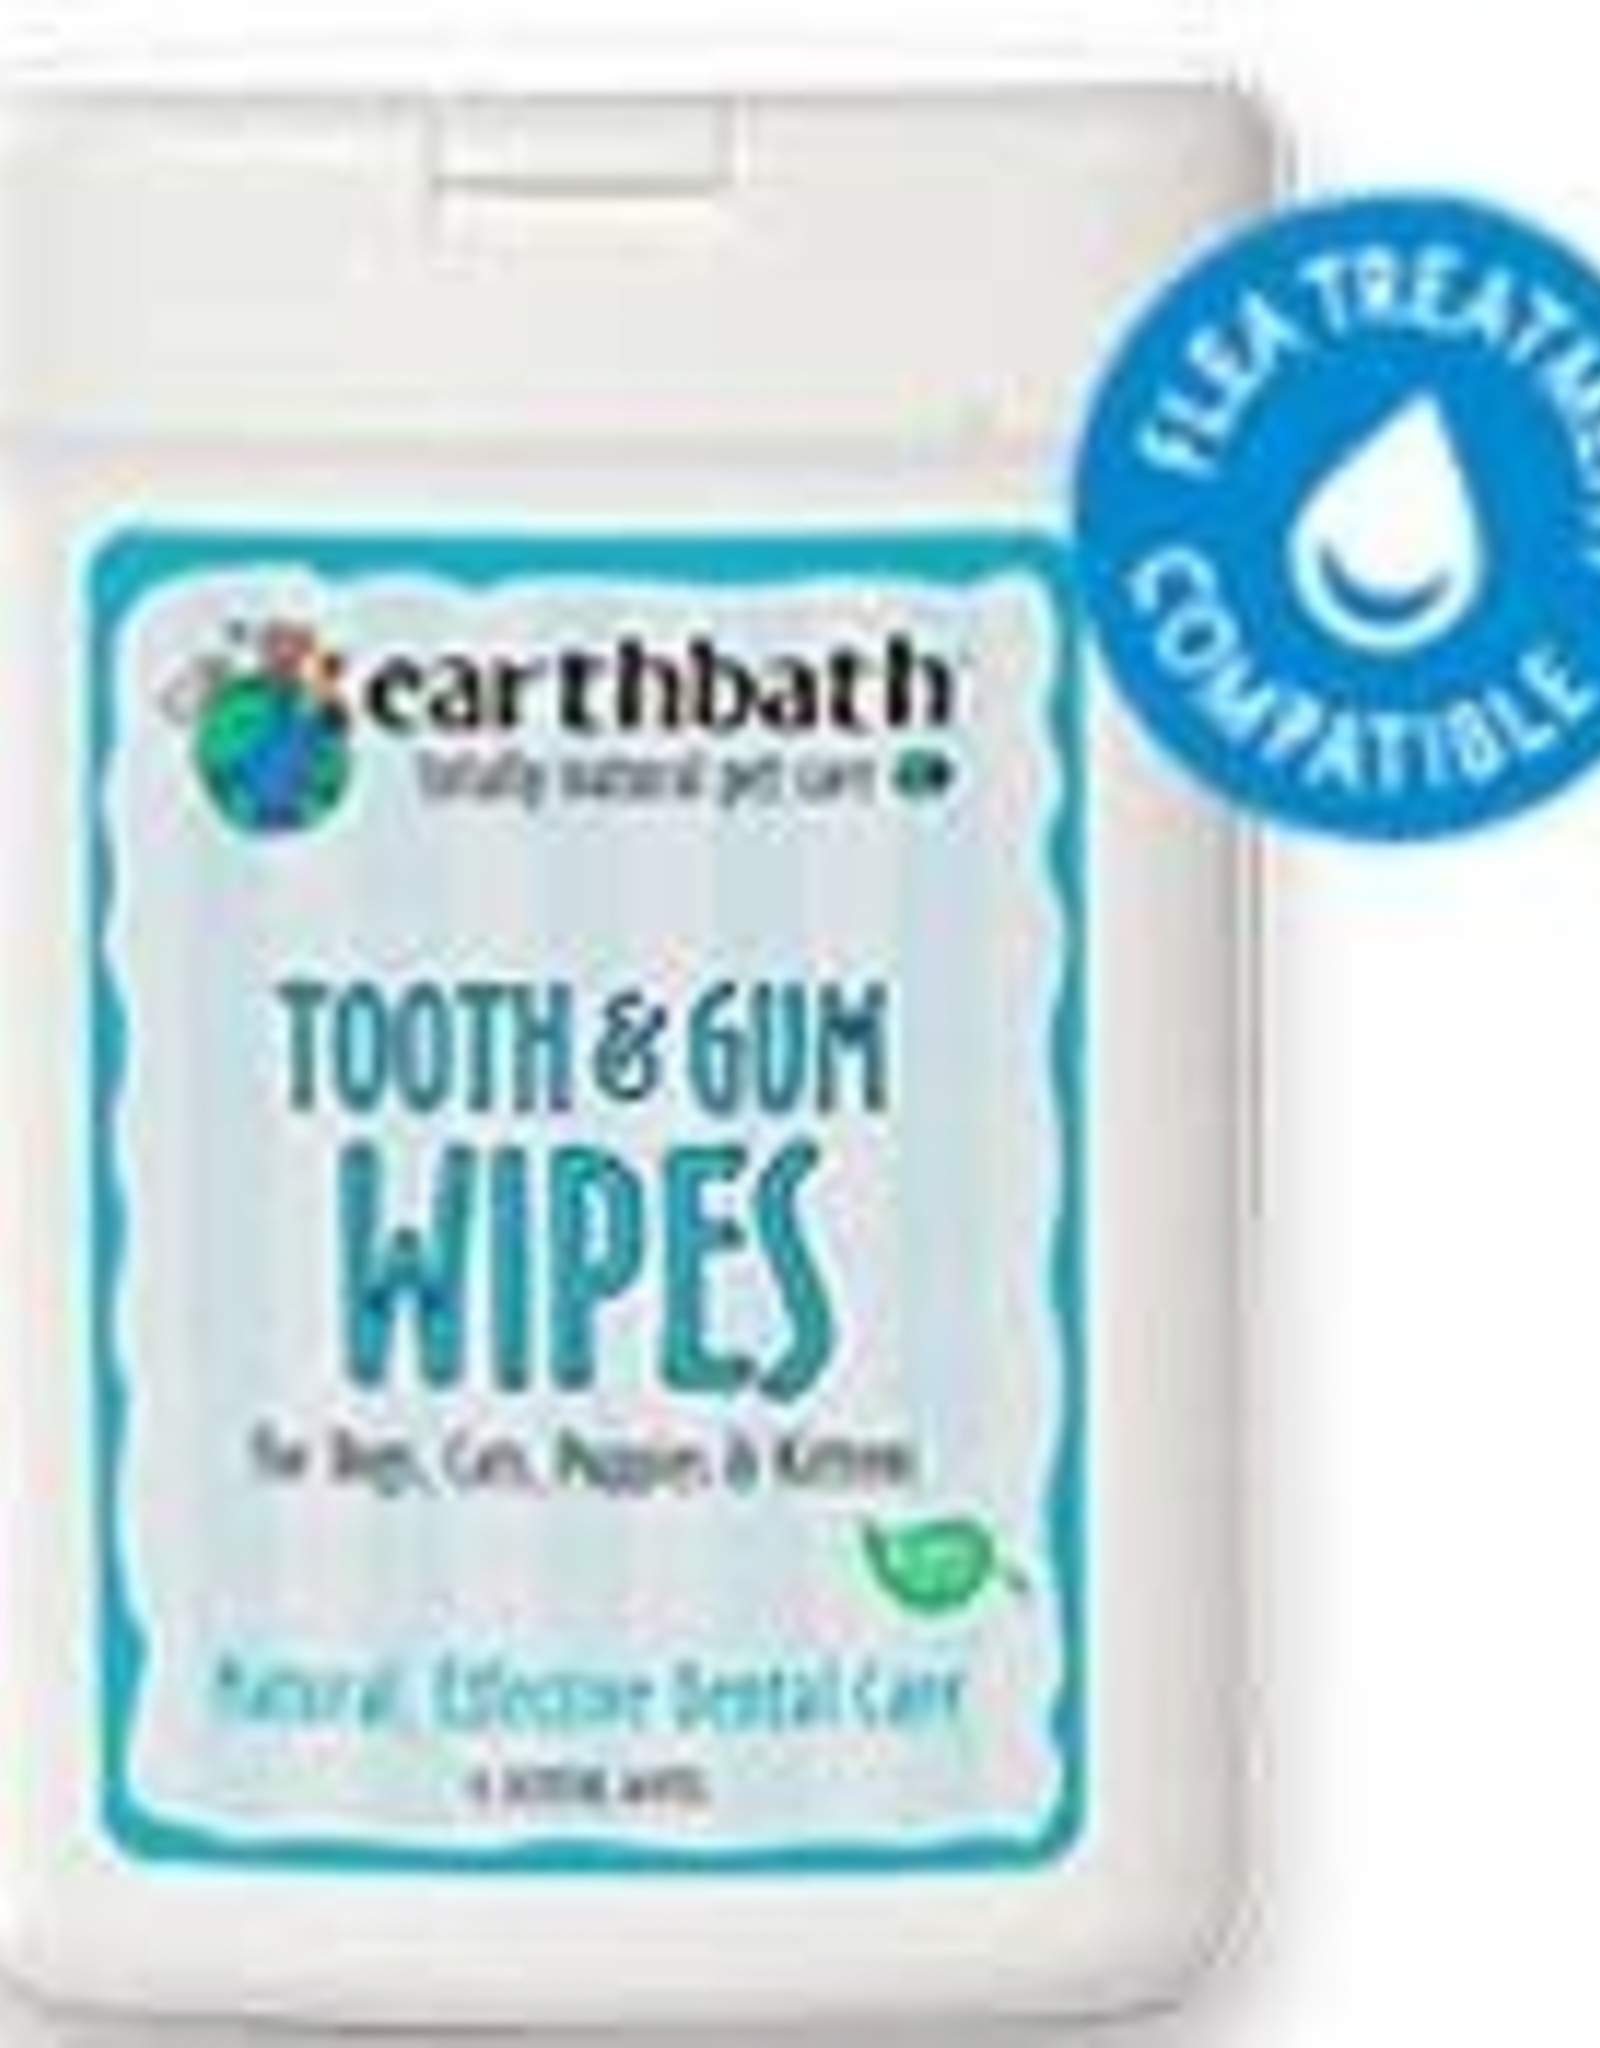 Earthbath Earthbath Tooth & Gum Wipes For Dogs, Cats, Puppies & Kittens 25 Ct